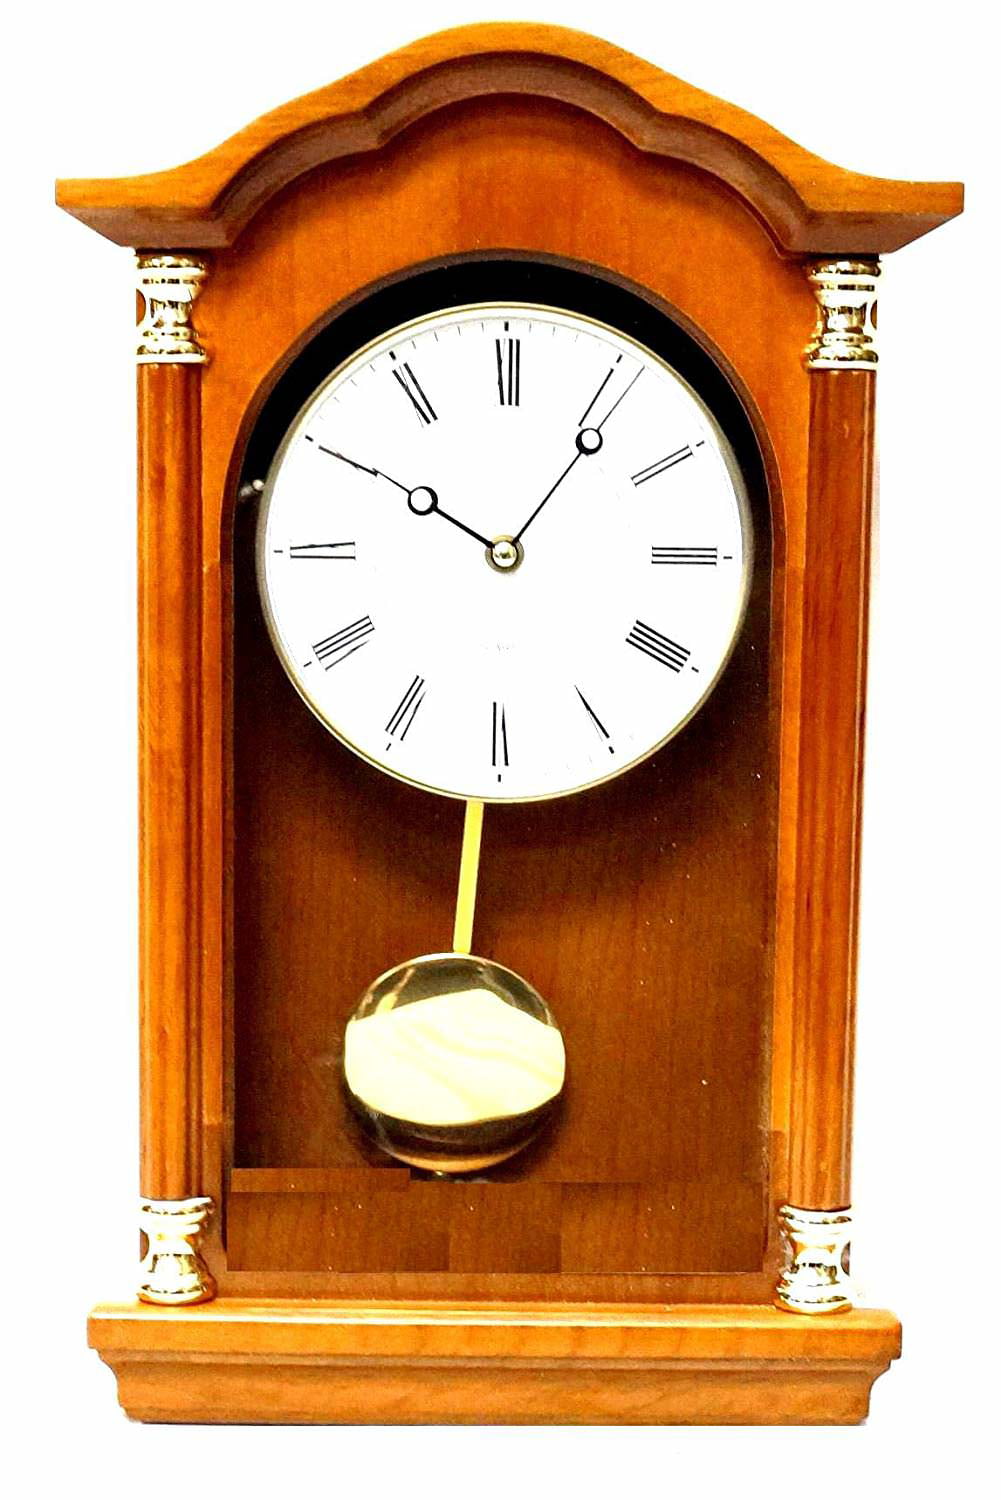 LARGE COUNTRY STYLE WOODEN FRAMED CLOCK 59cm High  Face  25cm PENDULUM BATTERY 